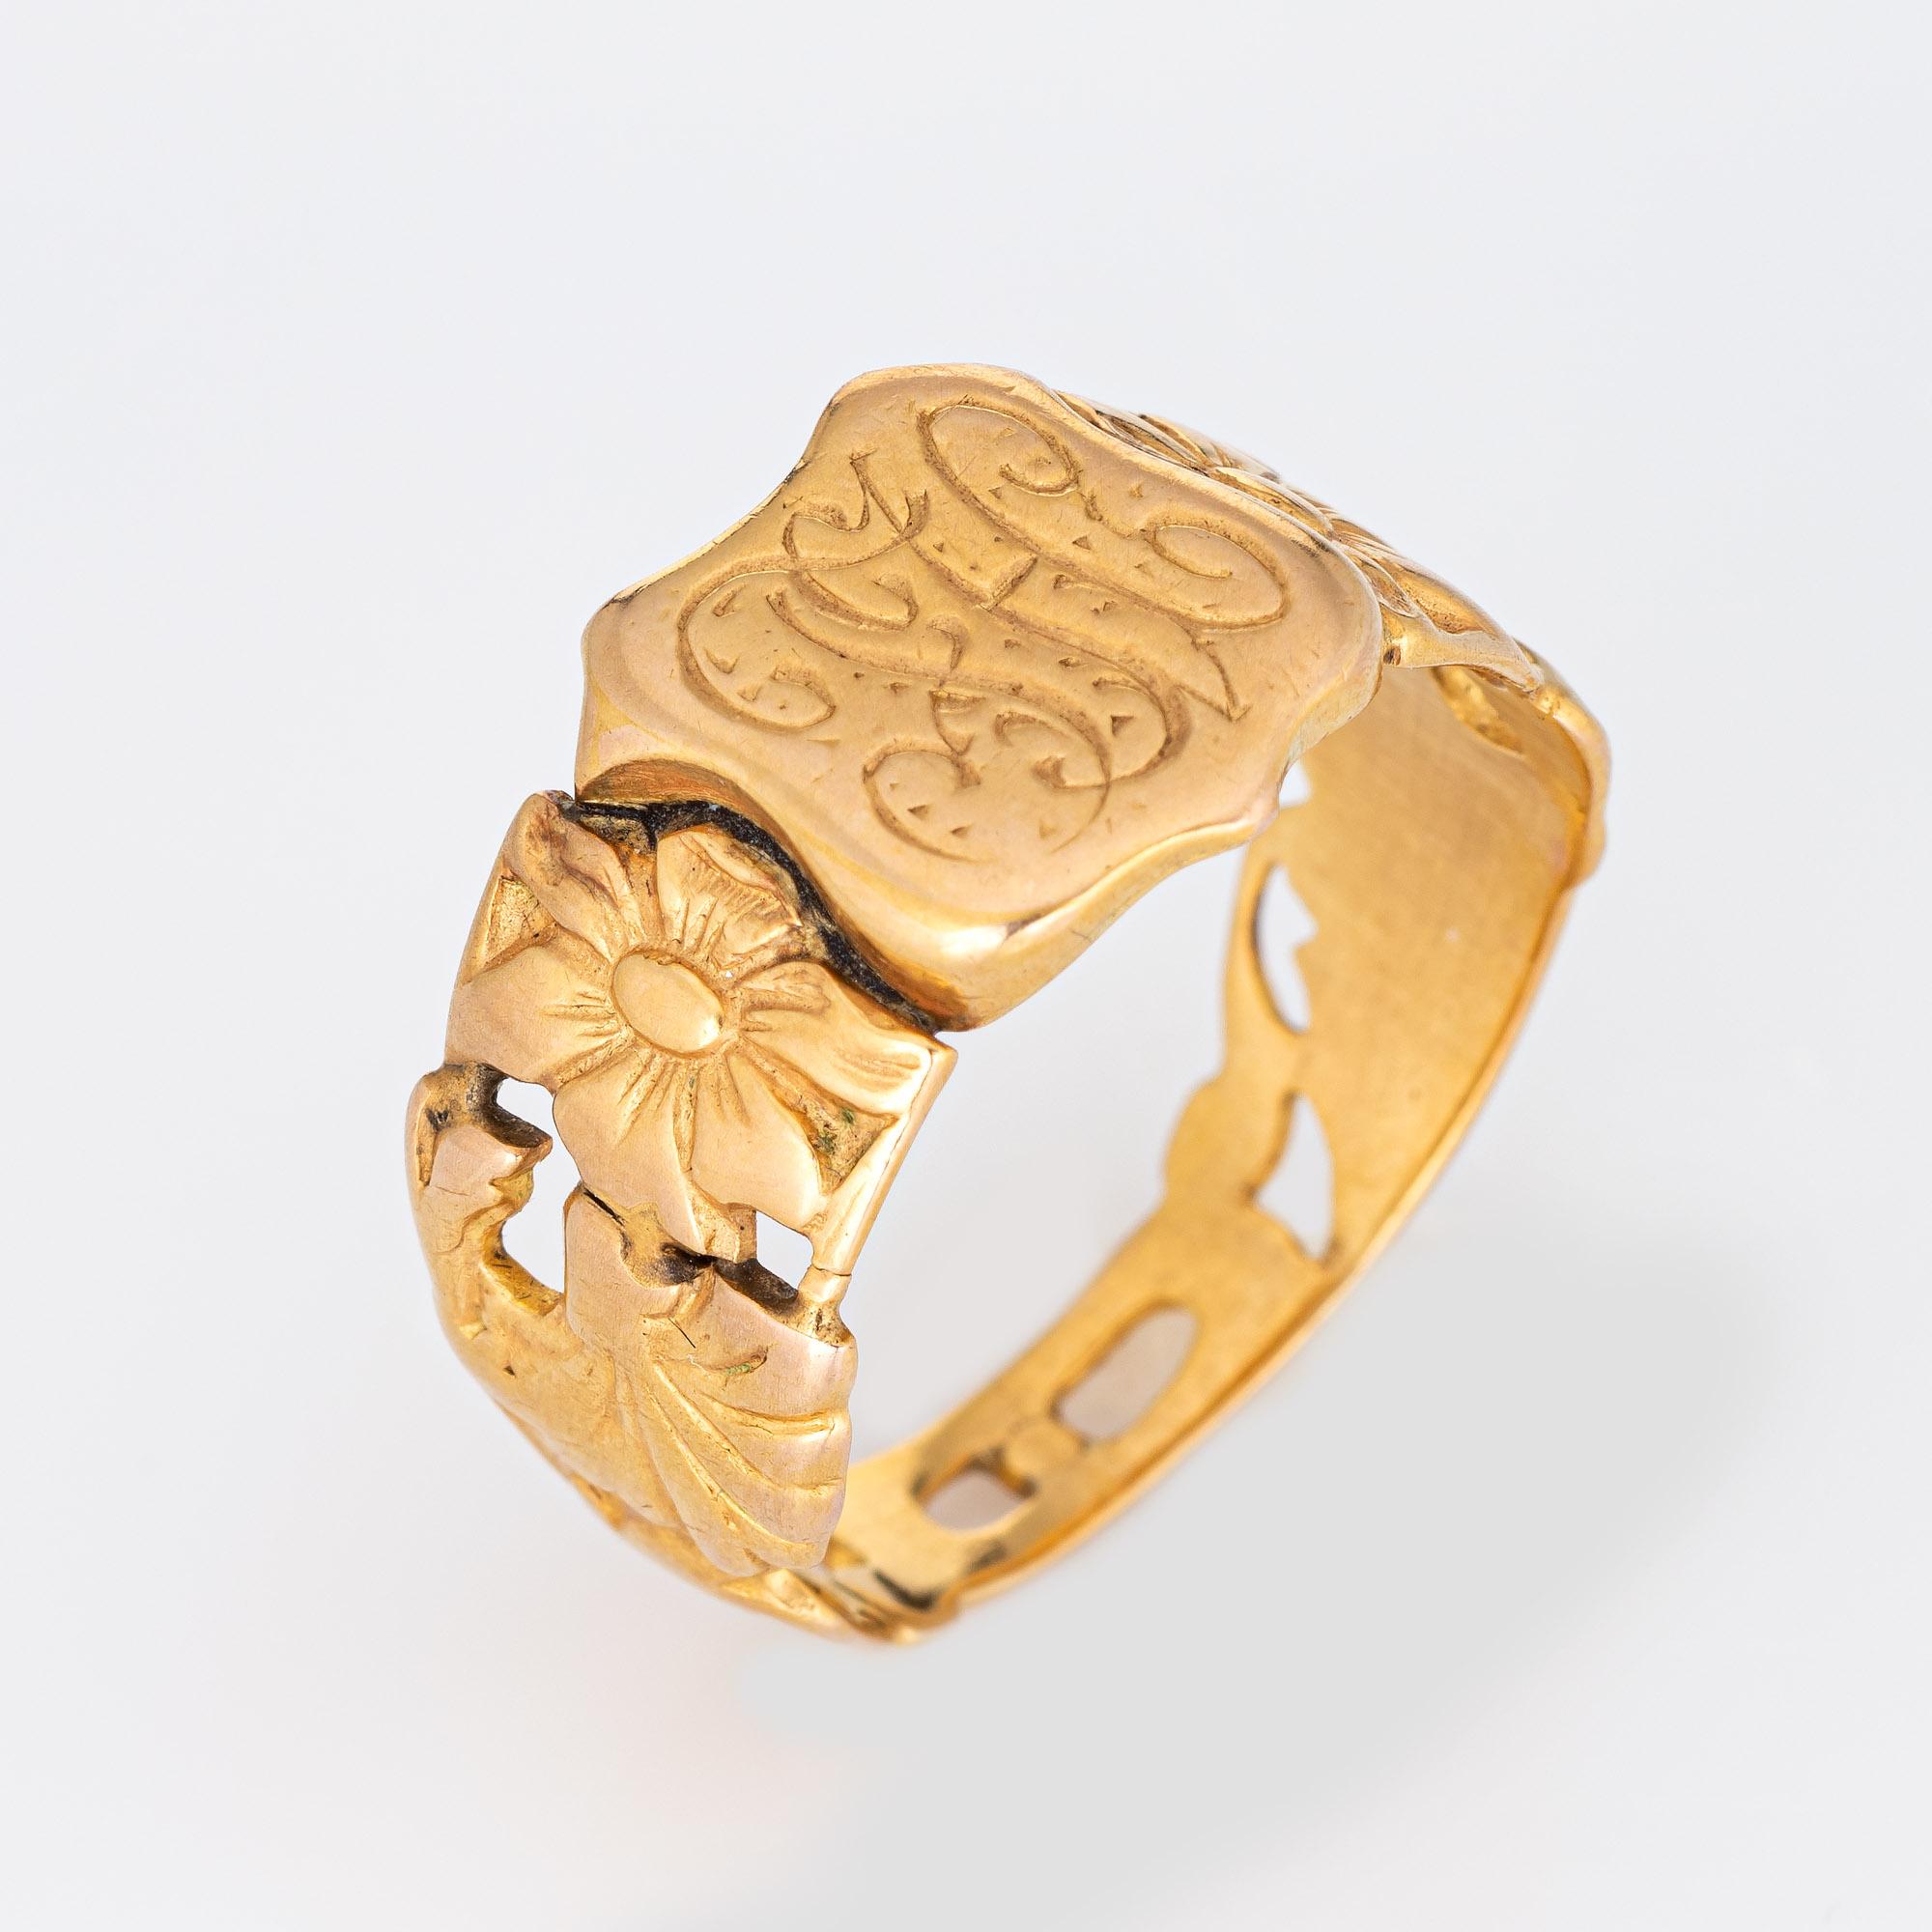 Finely detailed antique Victorian shield signet ring (circa 1880s to 1900s), crafted in 18 karat yellow gold. 

The center shield is engraved with the initials 